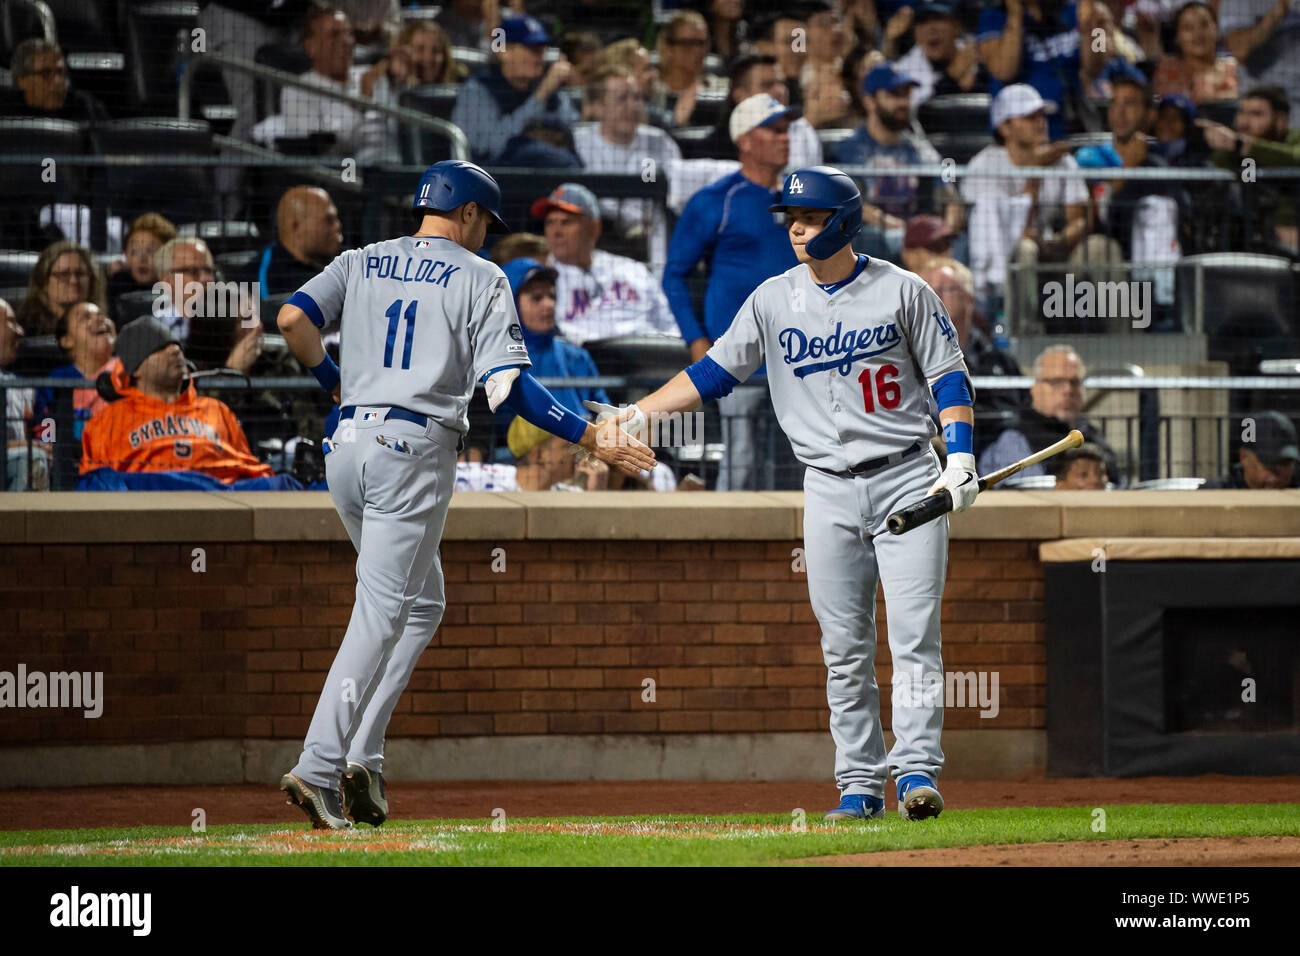 Queens, New York, USA. 13th Sep, 2019. Los Angeles Dodgers center fielder A.J. Pollock (11) celebrates with Los Angeles Dodgers catcher Will Smith (16) after scoring a run during the game between The New York Mets and The Los Angeles Dodgers at Citi Field in Queens, New York. Mandatory credit: Kostas Lymperopoulos/CSM/Alamy Live News Stock Photo